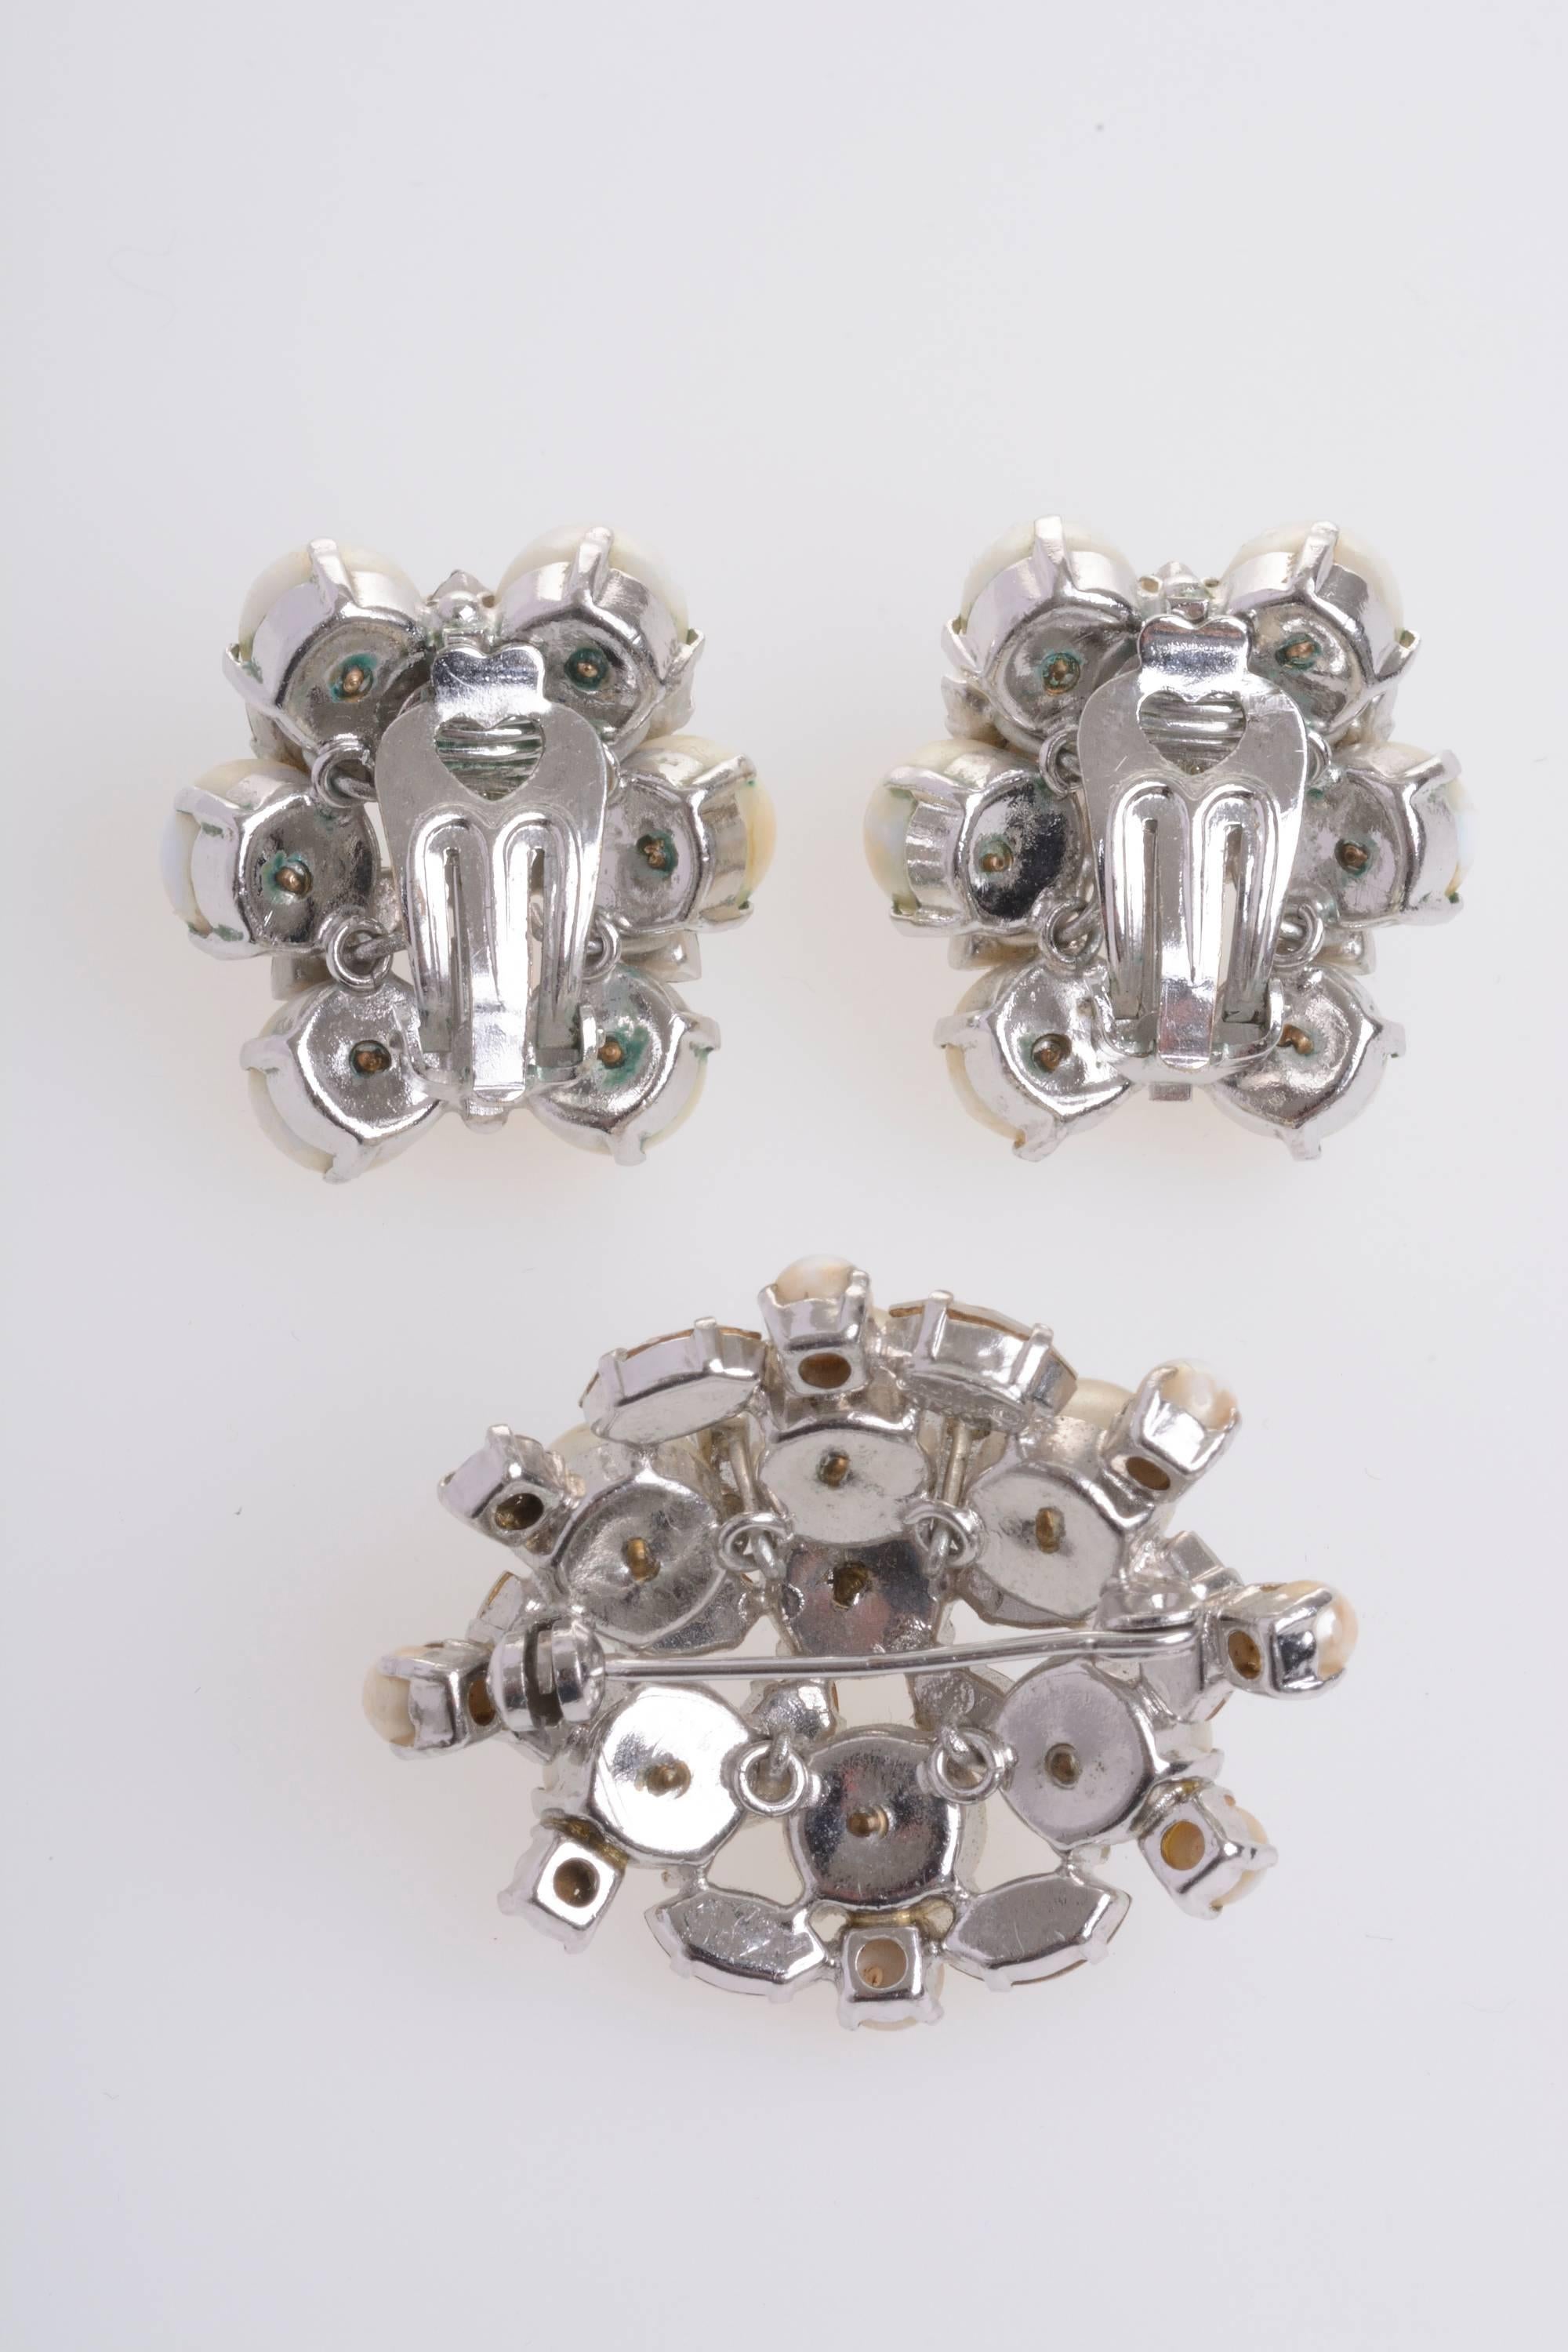 This gorgeous vintage set of earrings and brooch by DIOR has white ivory pearls and silver gems doing a floral shapes: the brooch has a oval shape made by 6 little pearls and 8 gems more around the flower, the earring have circular floral shape and